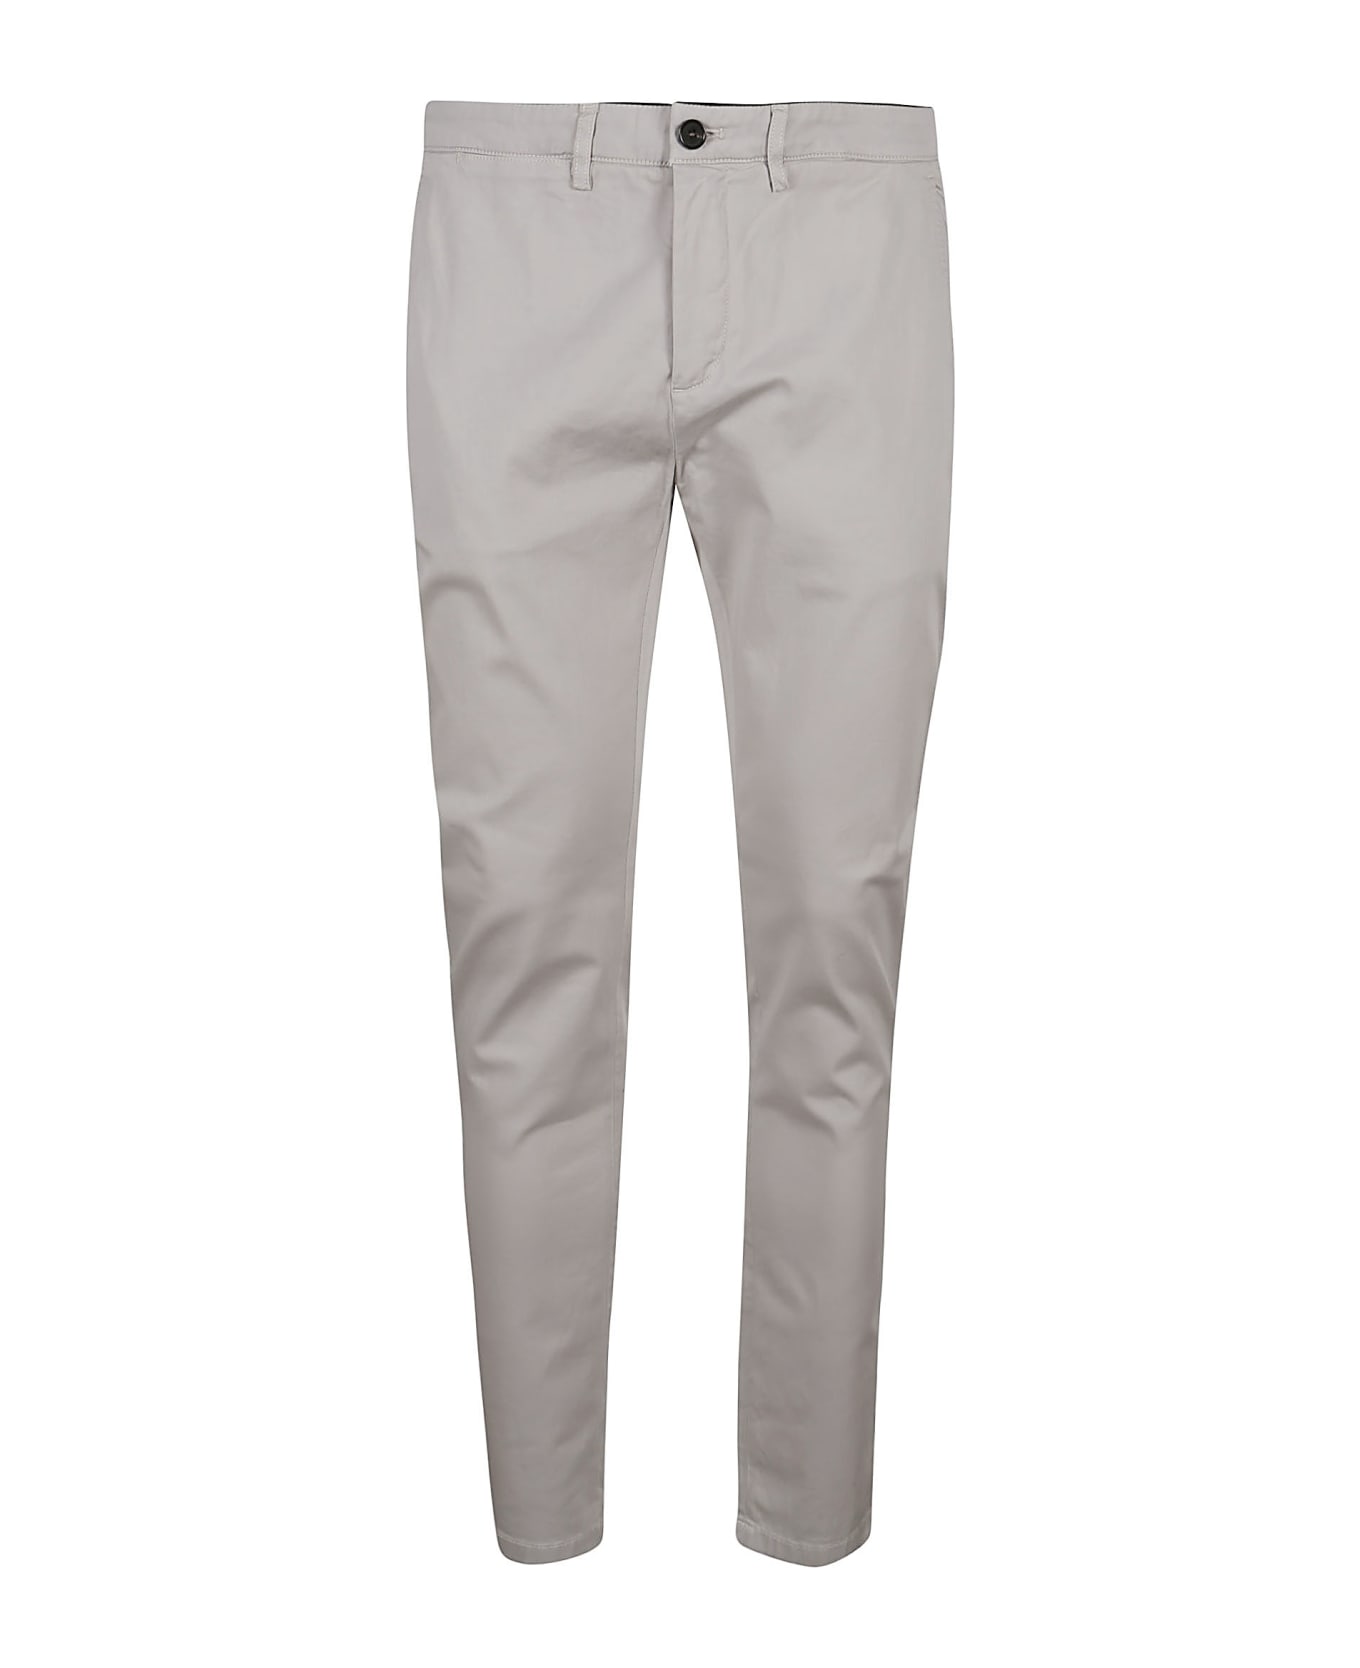 Department Five Mike Chinos Superslim Pant - Stucco ボトムス